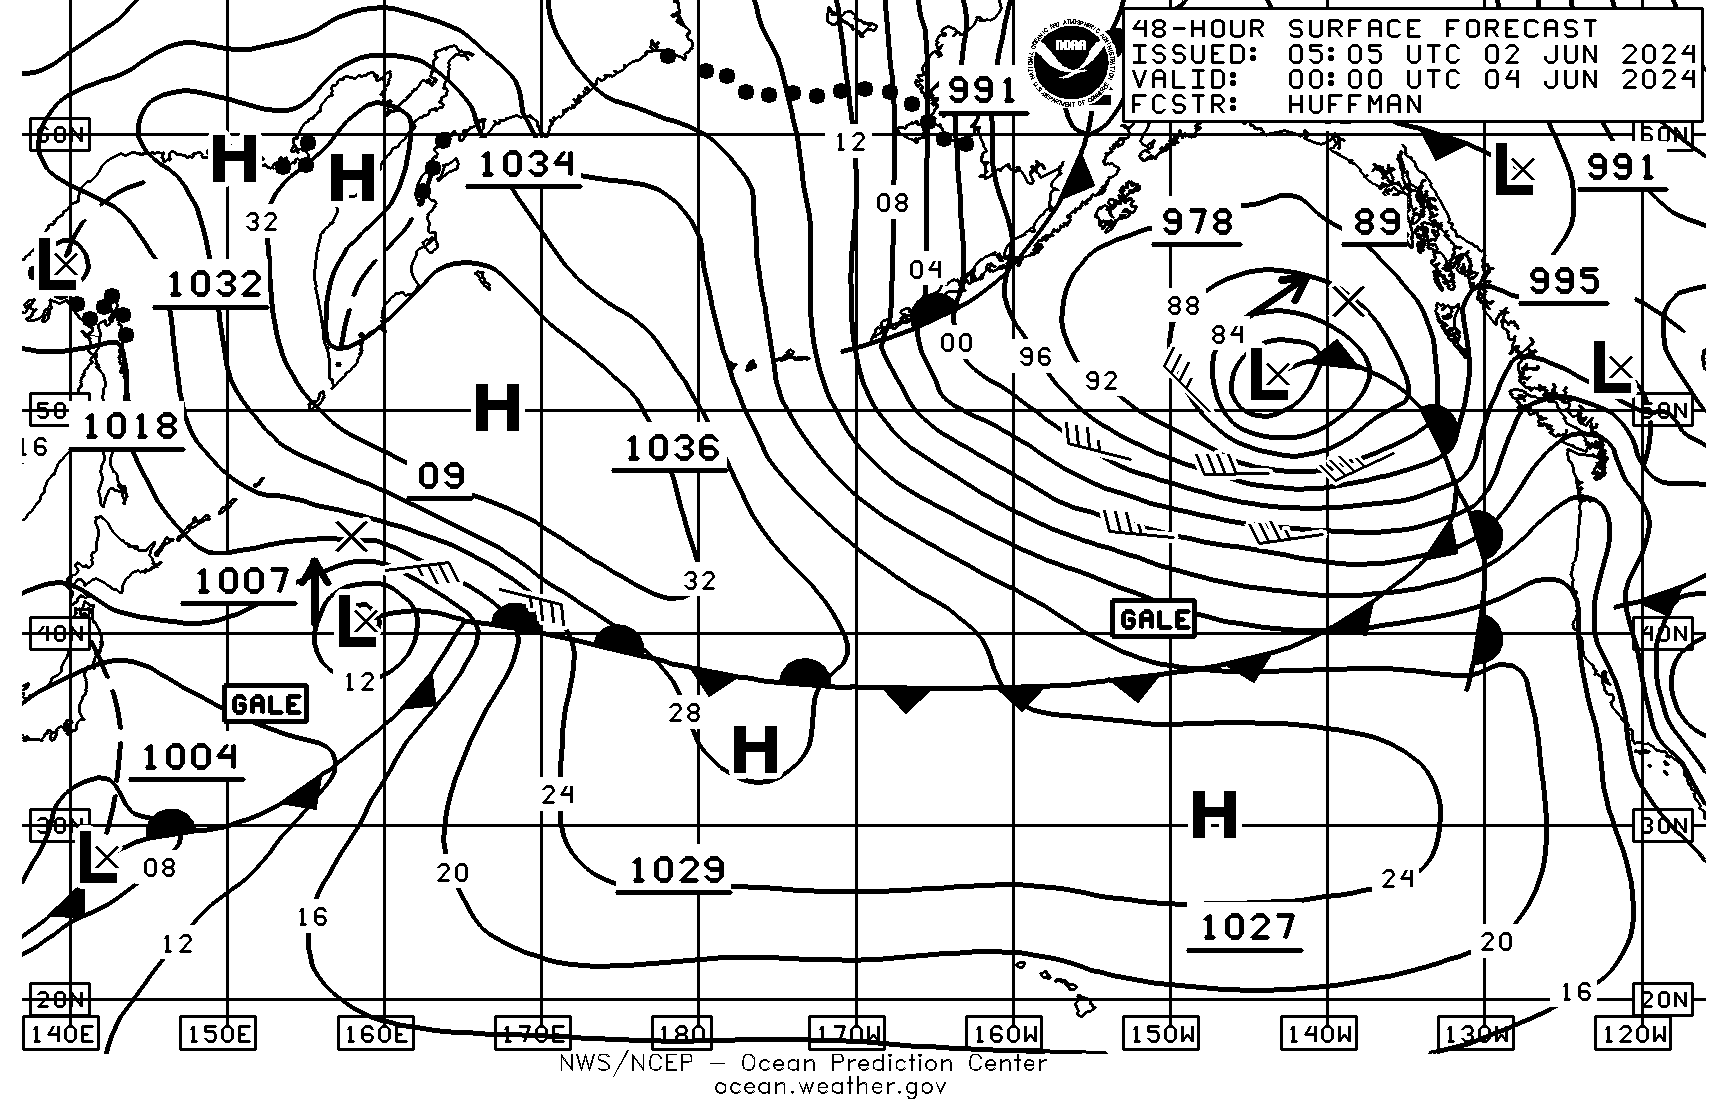 Image of 48-Hour Surface Forecasts